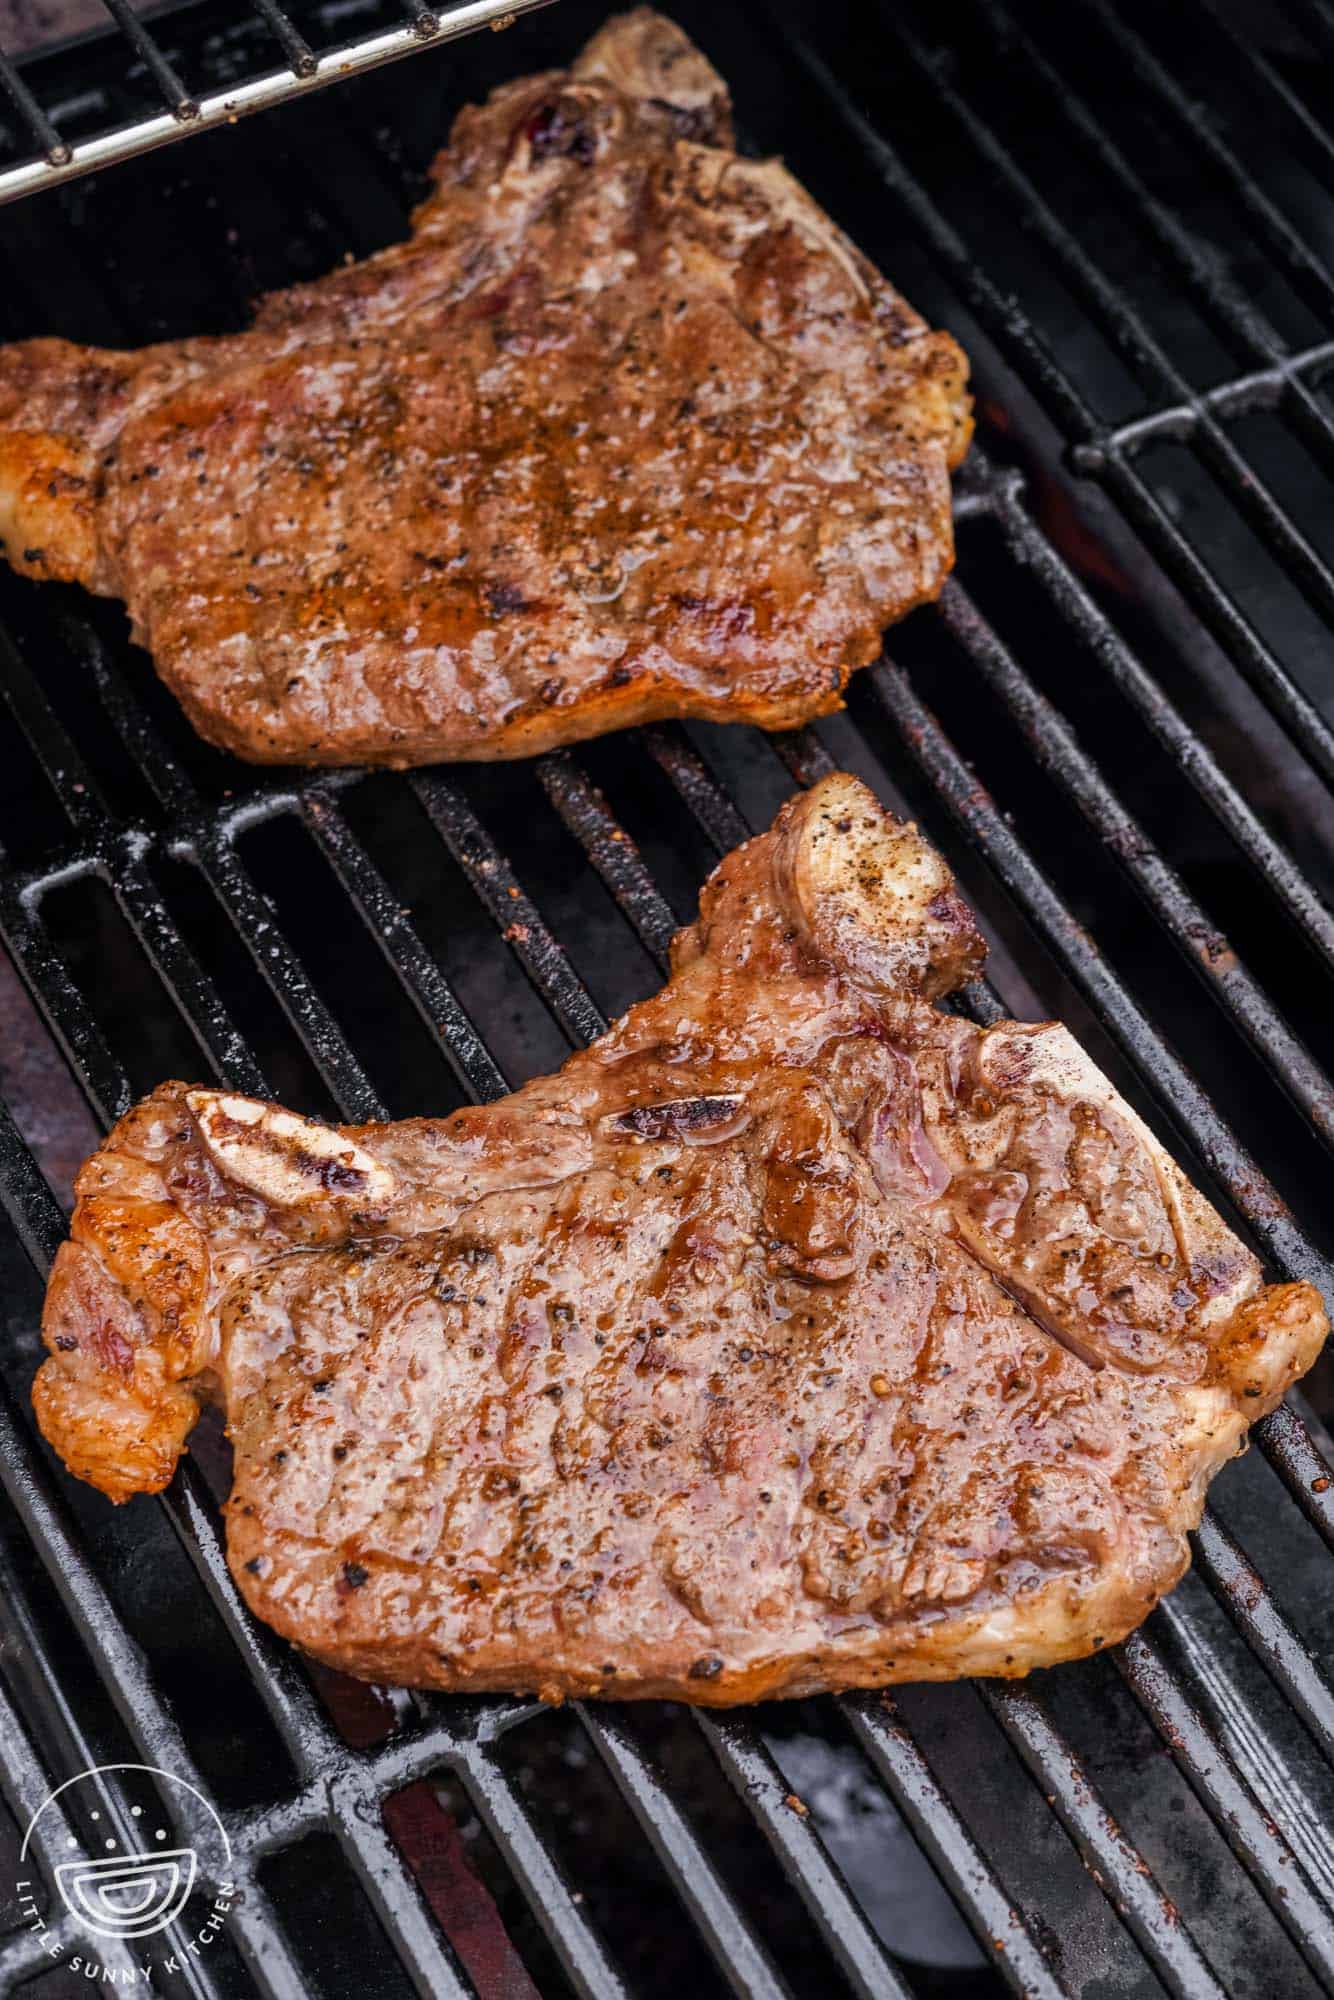 Grilled t bone steak on the grill.